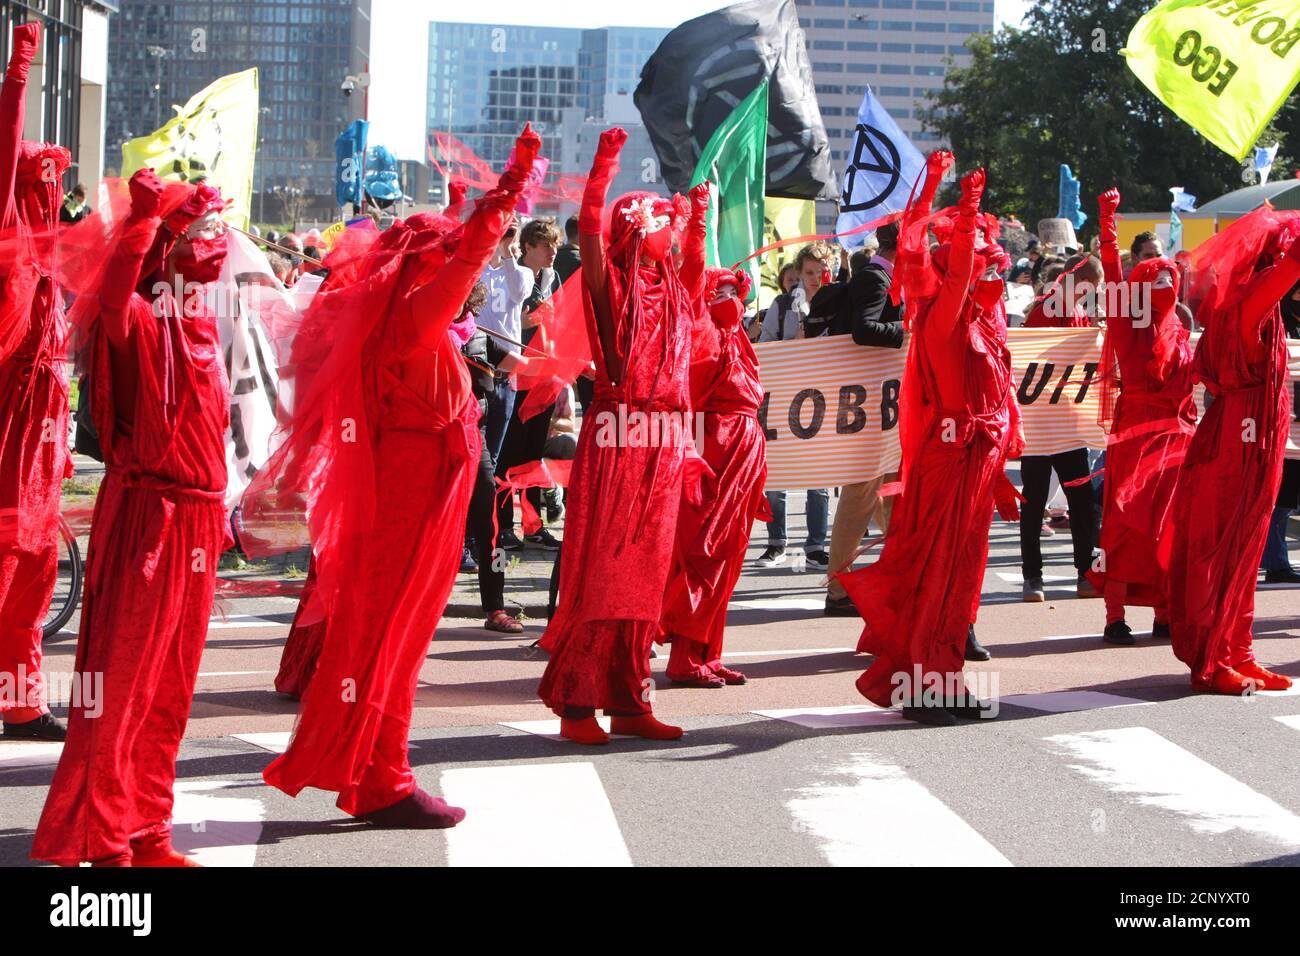 Extinction Rebellions Red Rebell group and activists block the street during protest at the Zuidas financial district amid the Coronavirus pandemic on Stock Photo